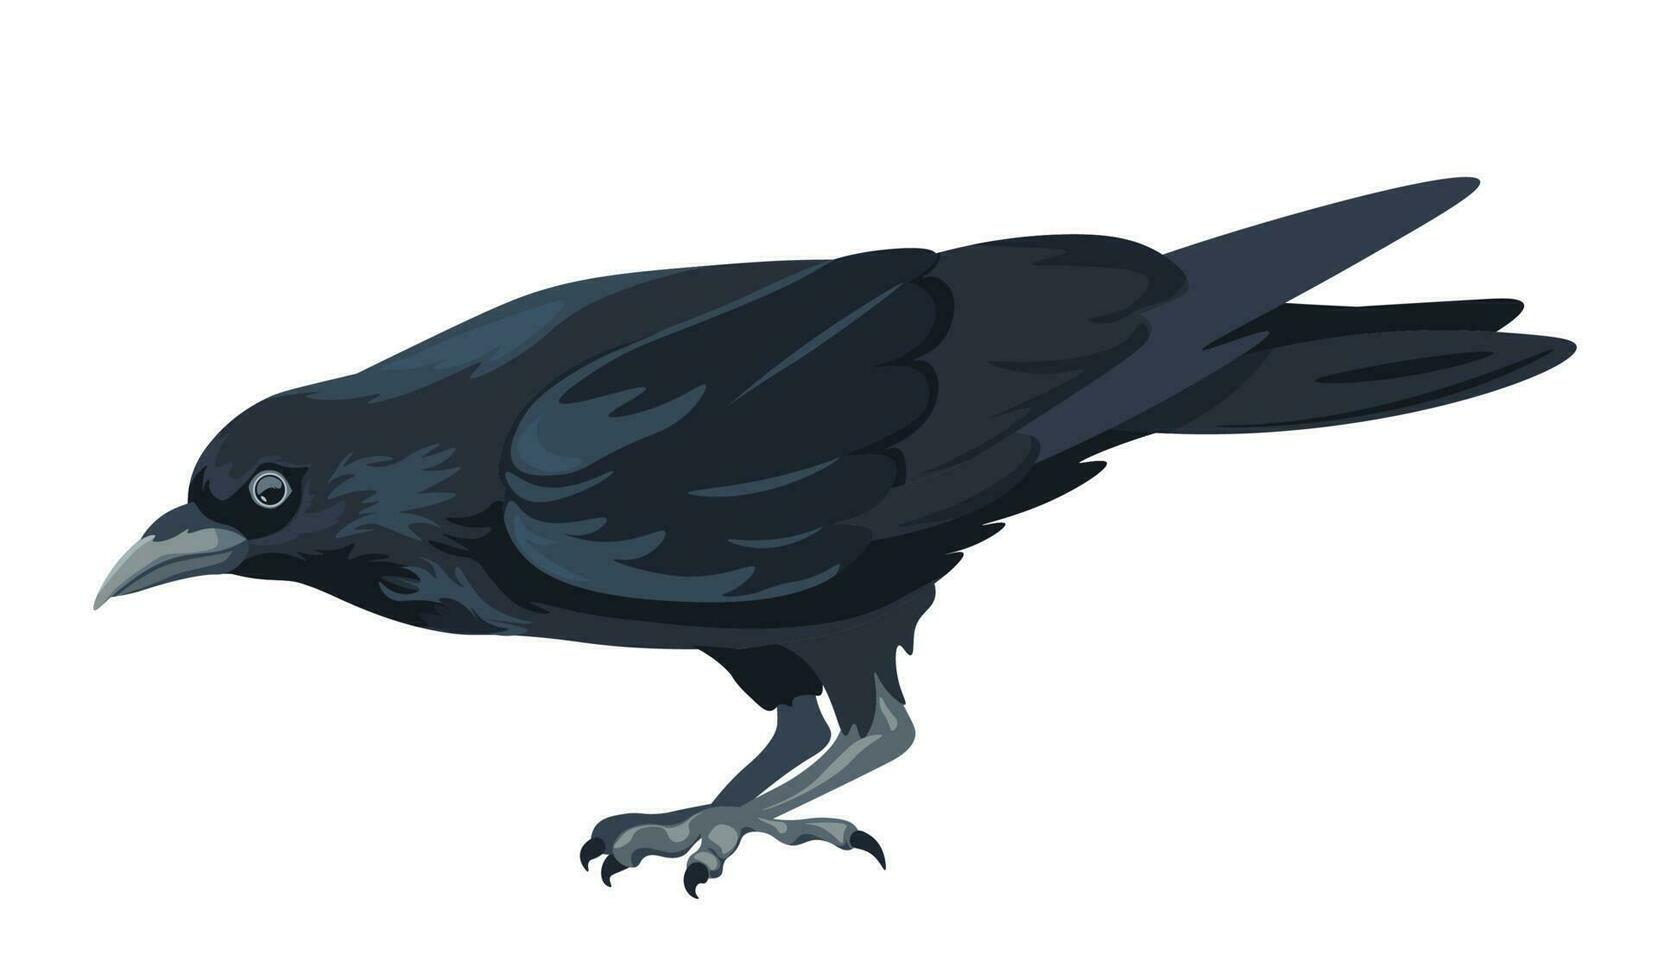 Large black bird, raven or crow animal of forest vector